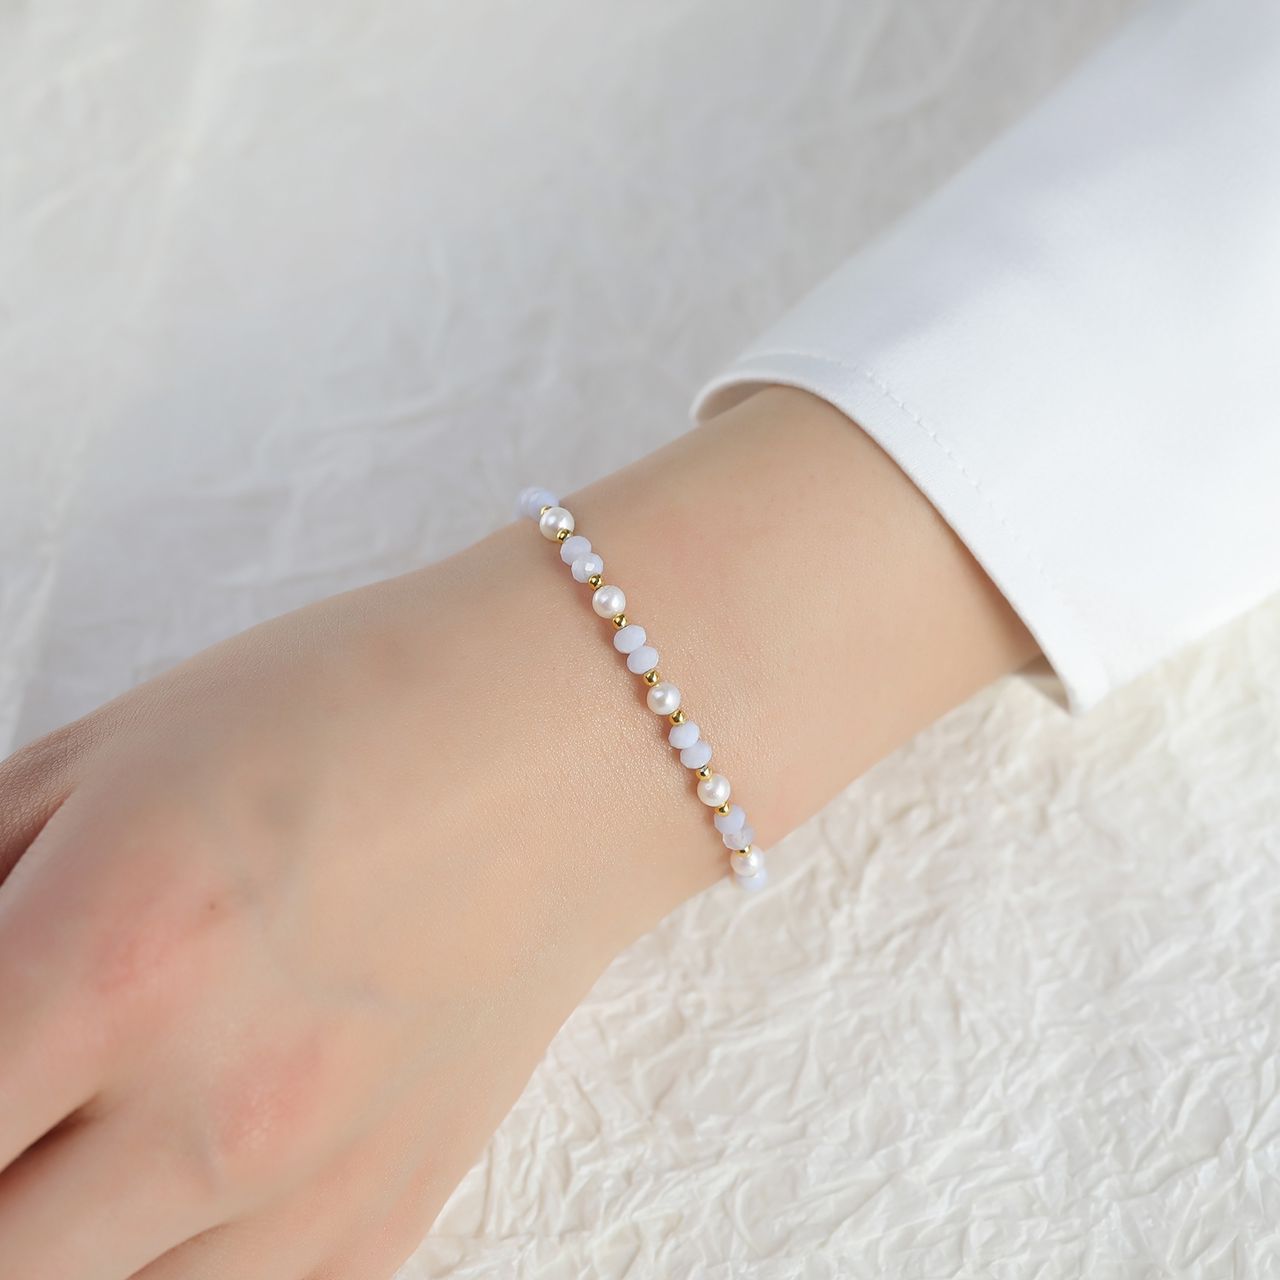 Pearly Care Band Blue Lace Agate Bracelet